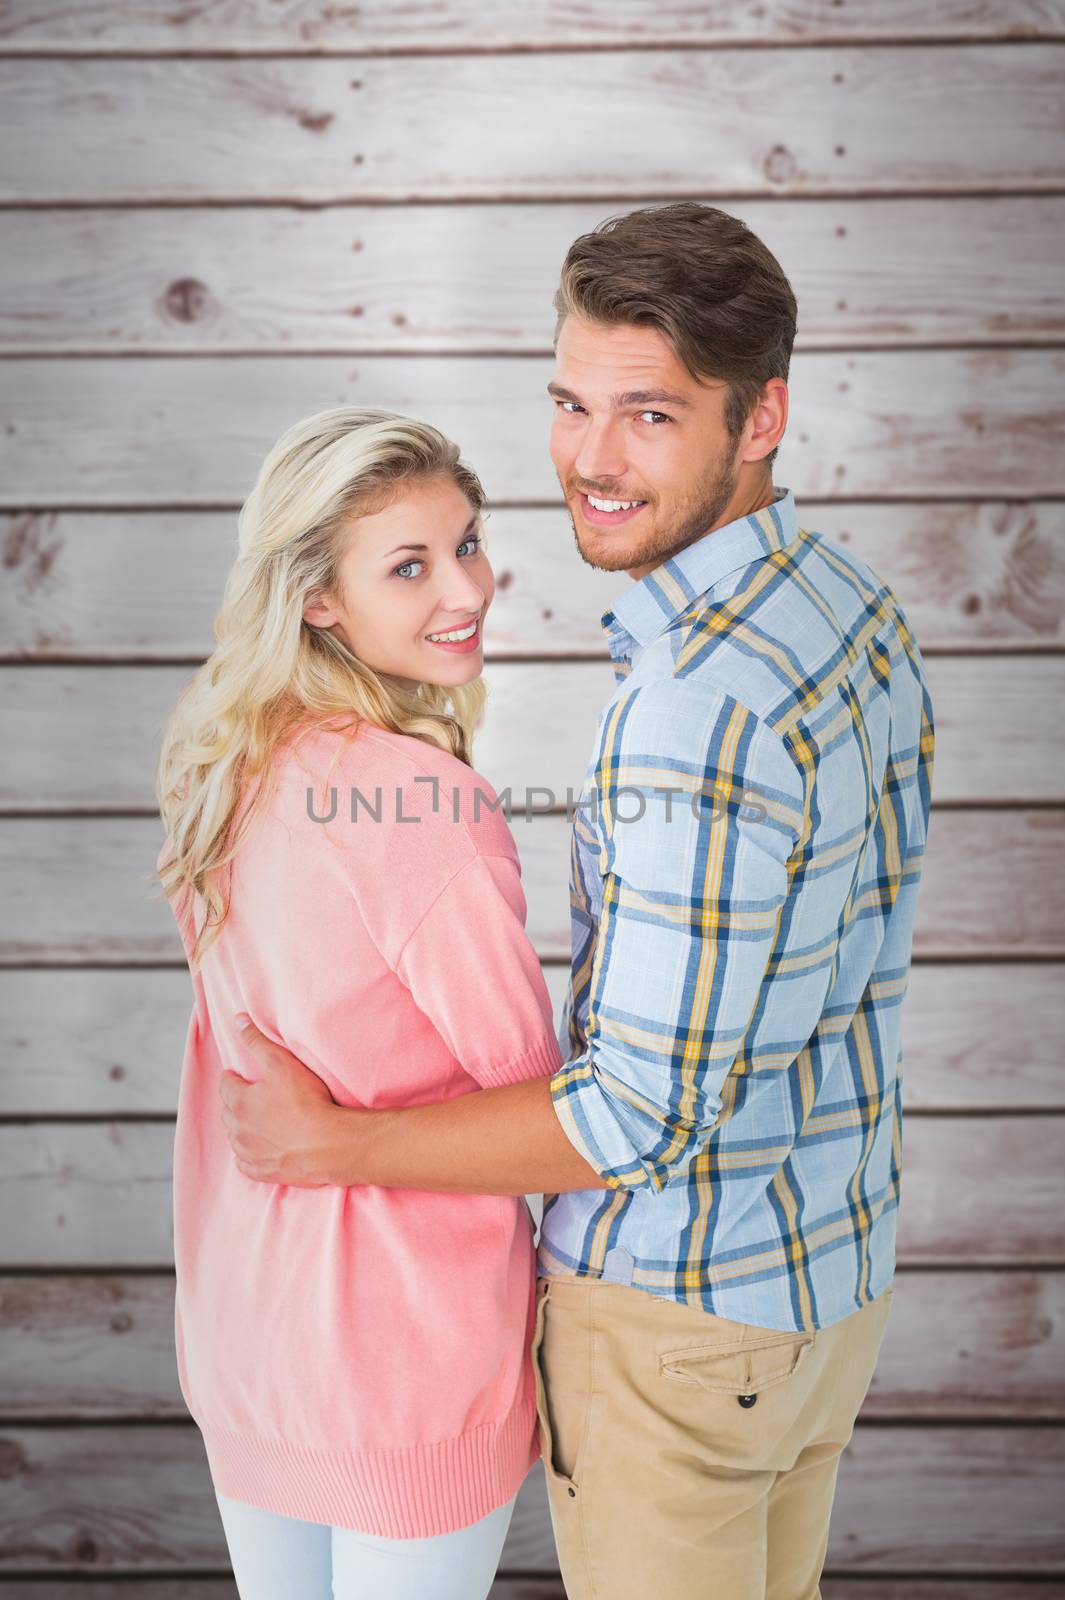 Attractive couple turning and smiling at camera against wooden planks